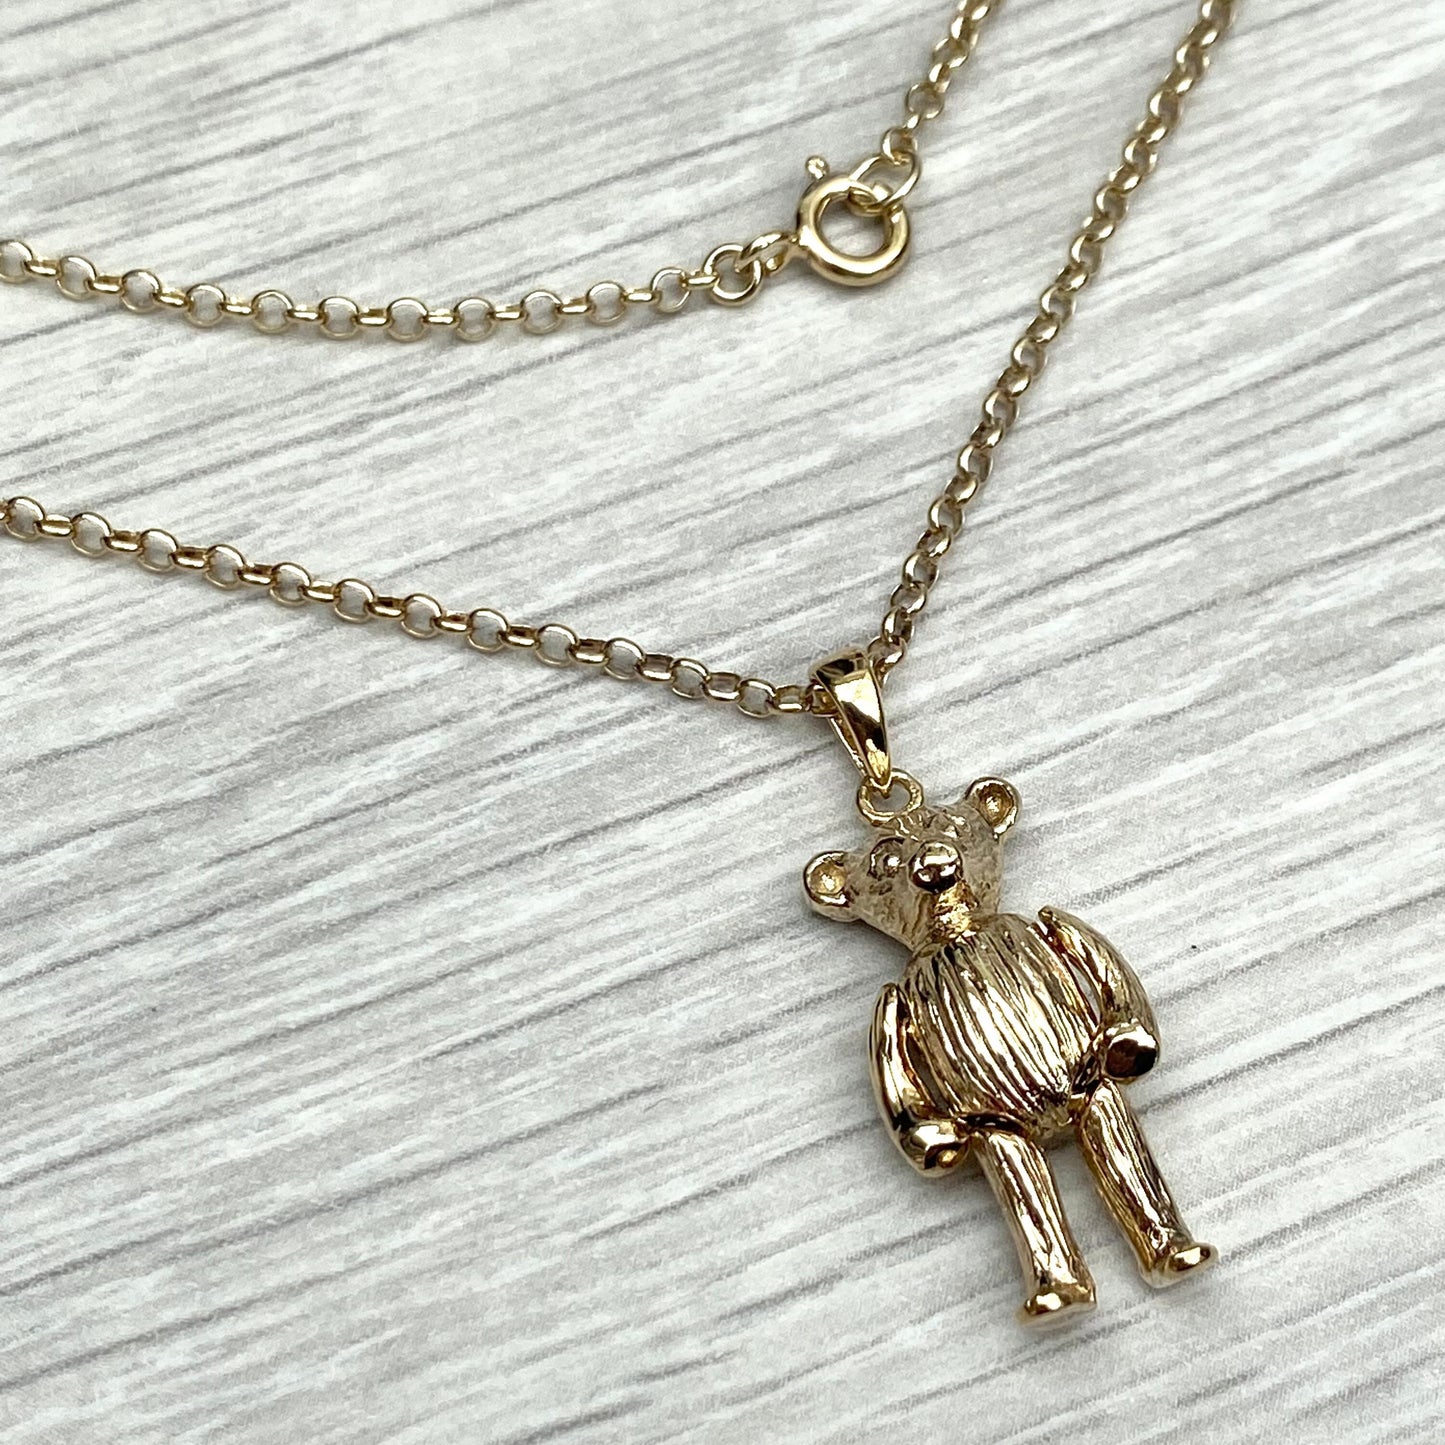 Vintage sterling silver gold plated teddy bear pendant and chain - 18 inch length